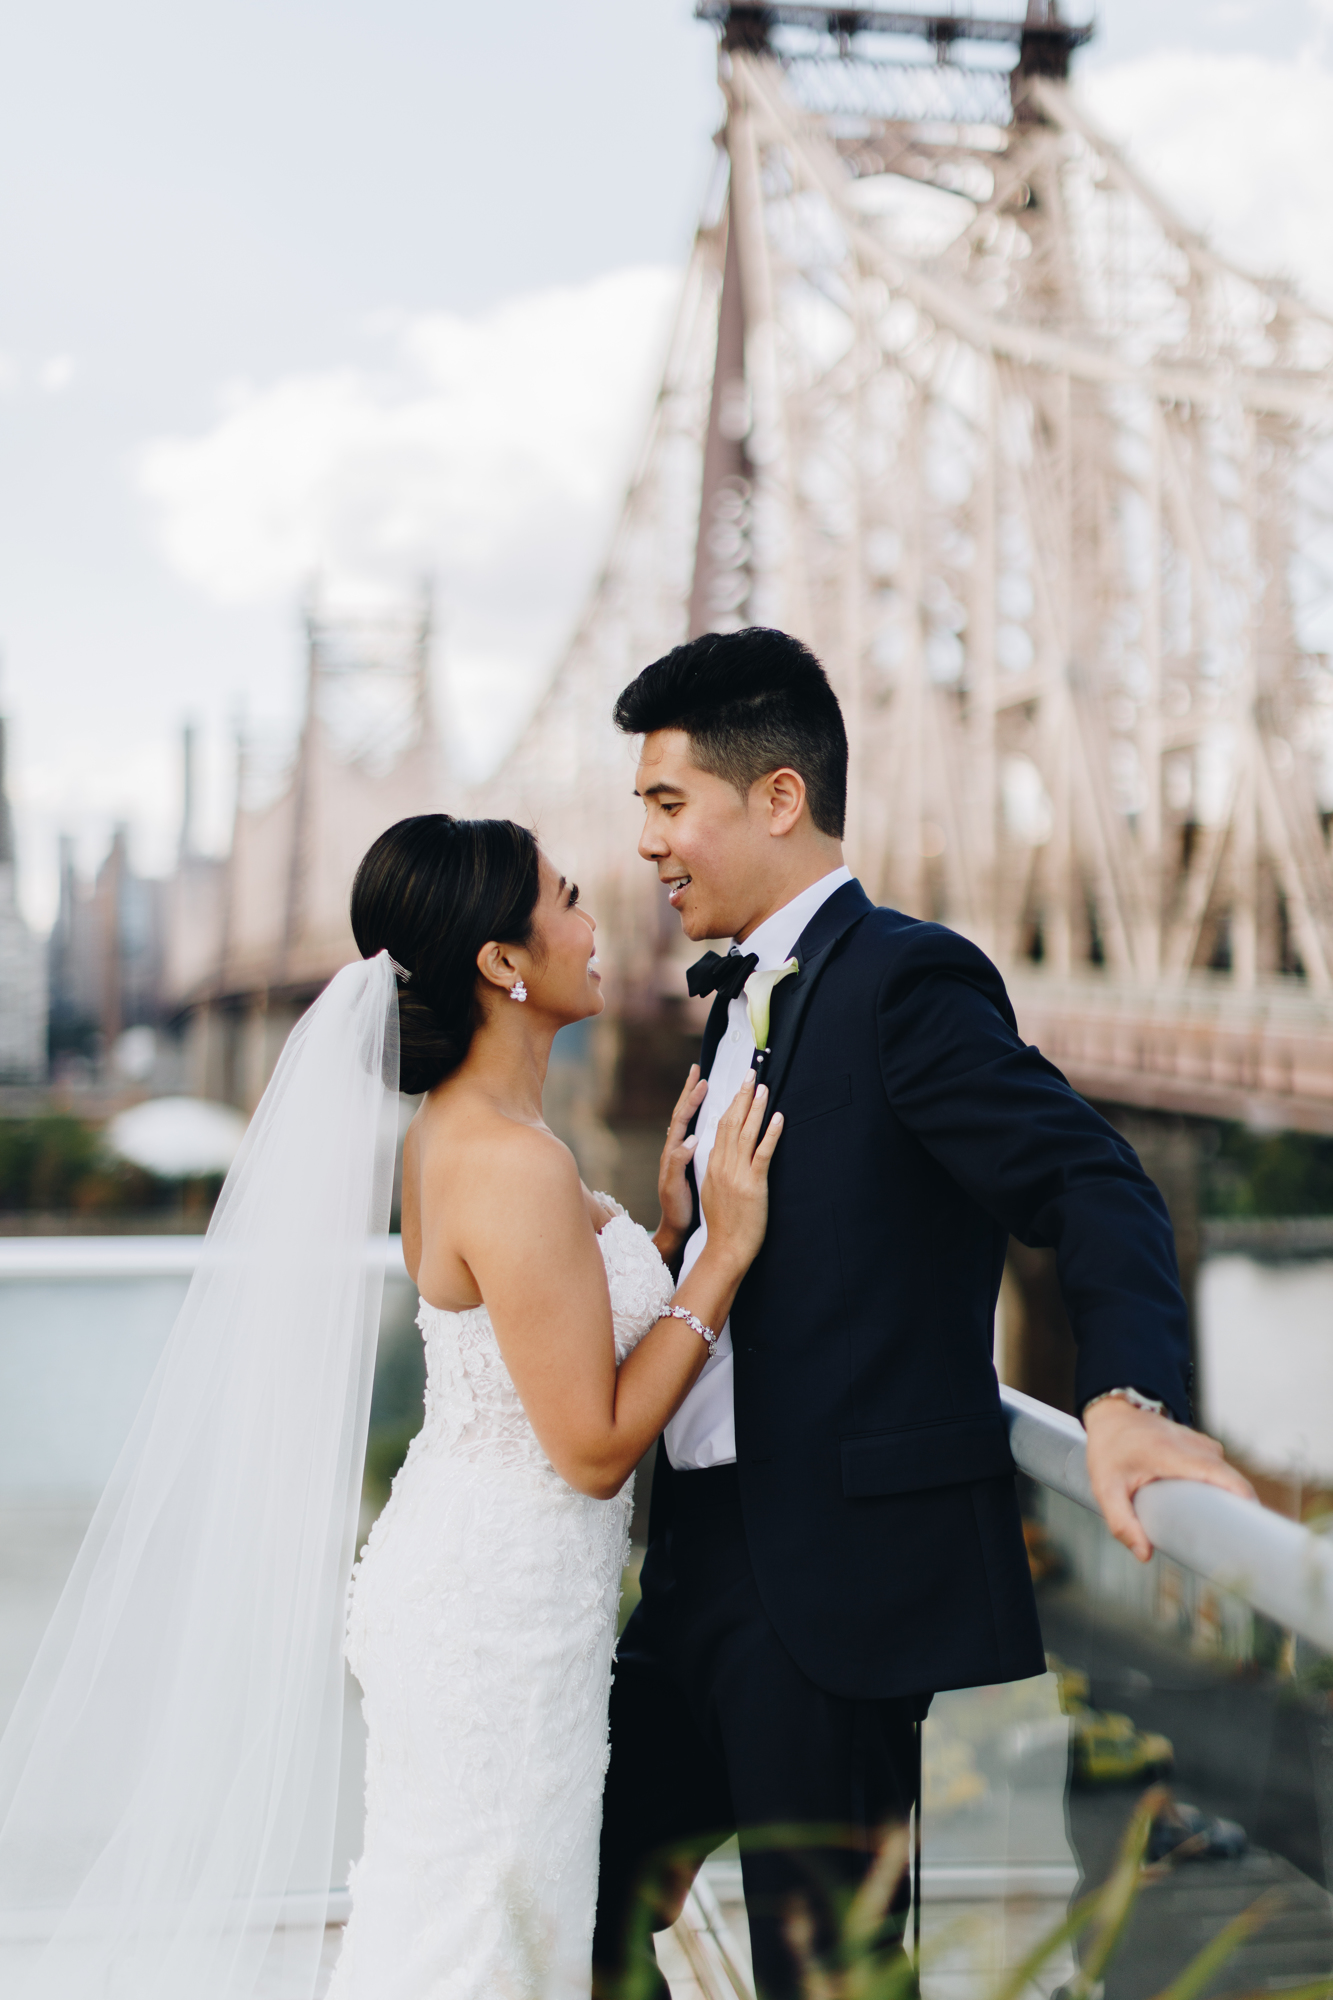 Romantic wedding photos on the roof of Ravel Hotel in NYC